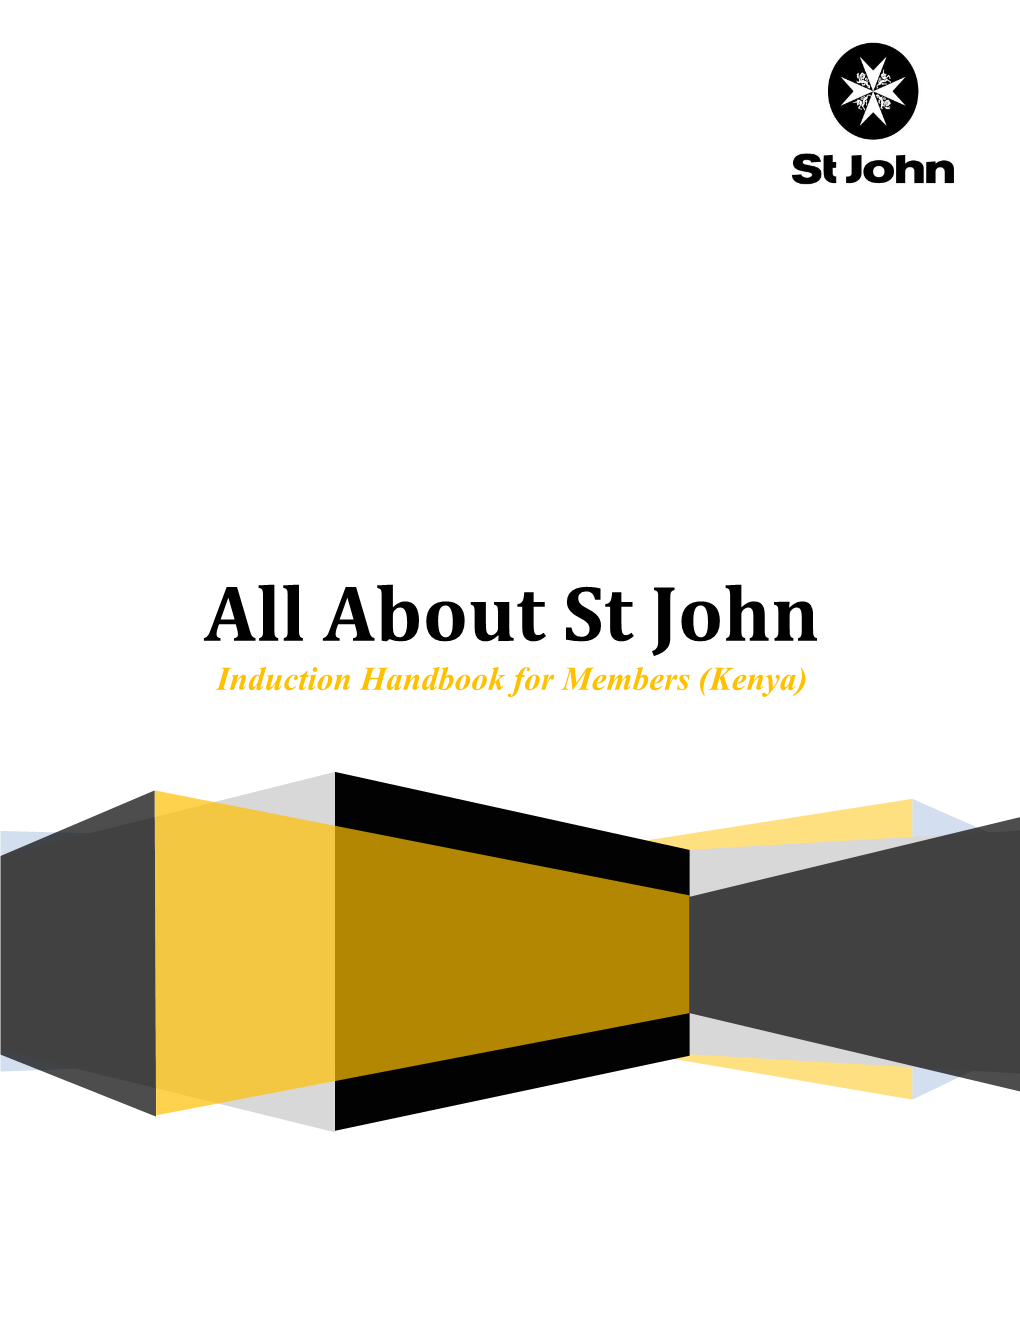 All About St John – Induction Handbook for Members Kenya